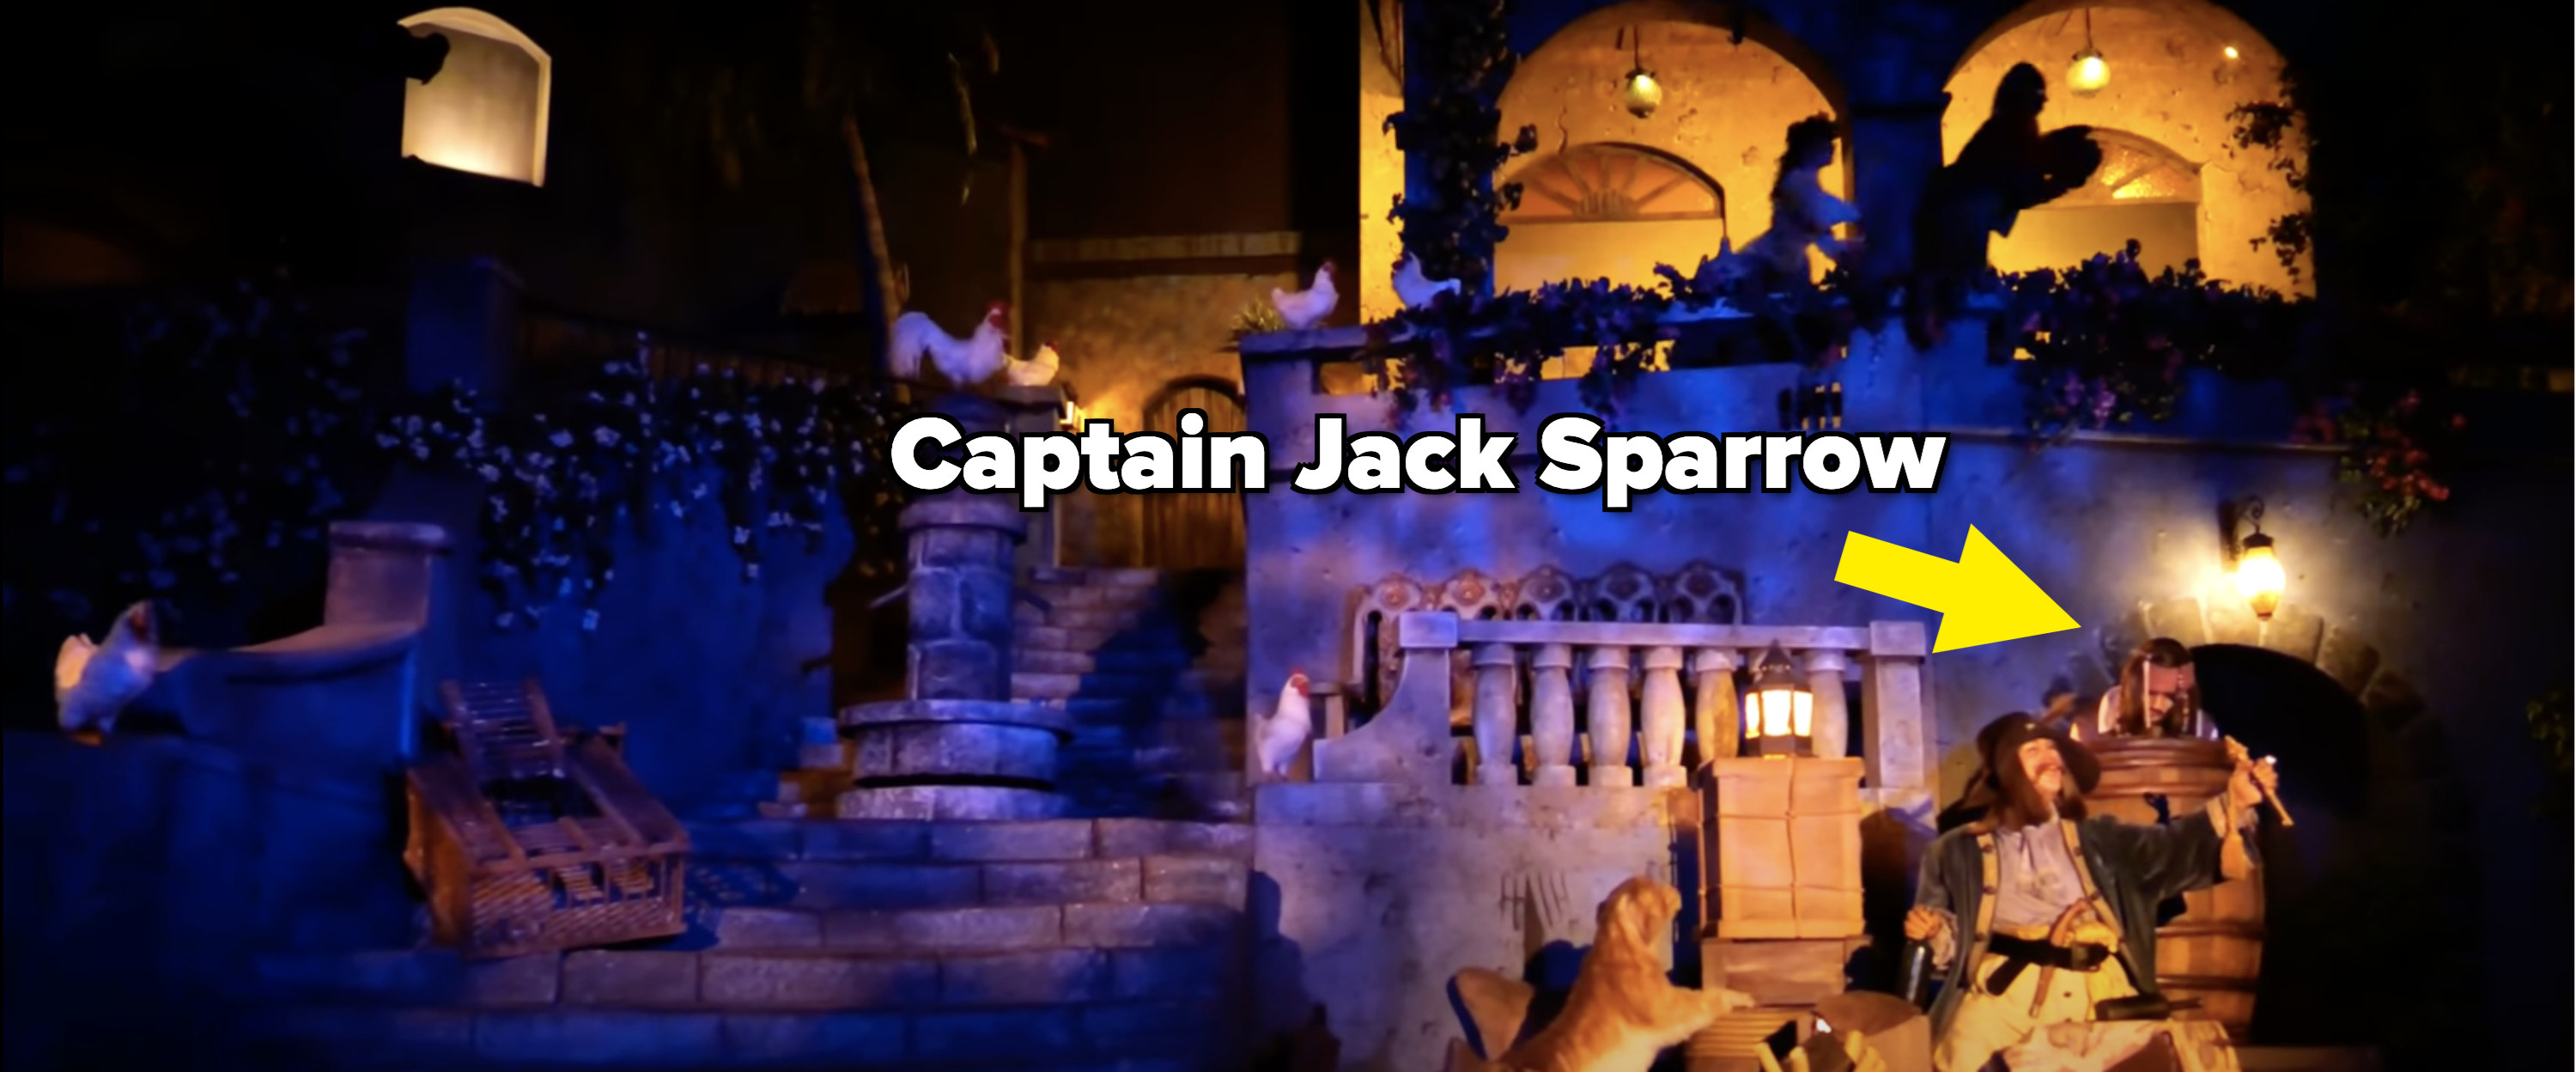 Inside the Pirates of the Caribbean Ride at Magic Kingdom